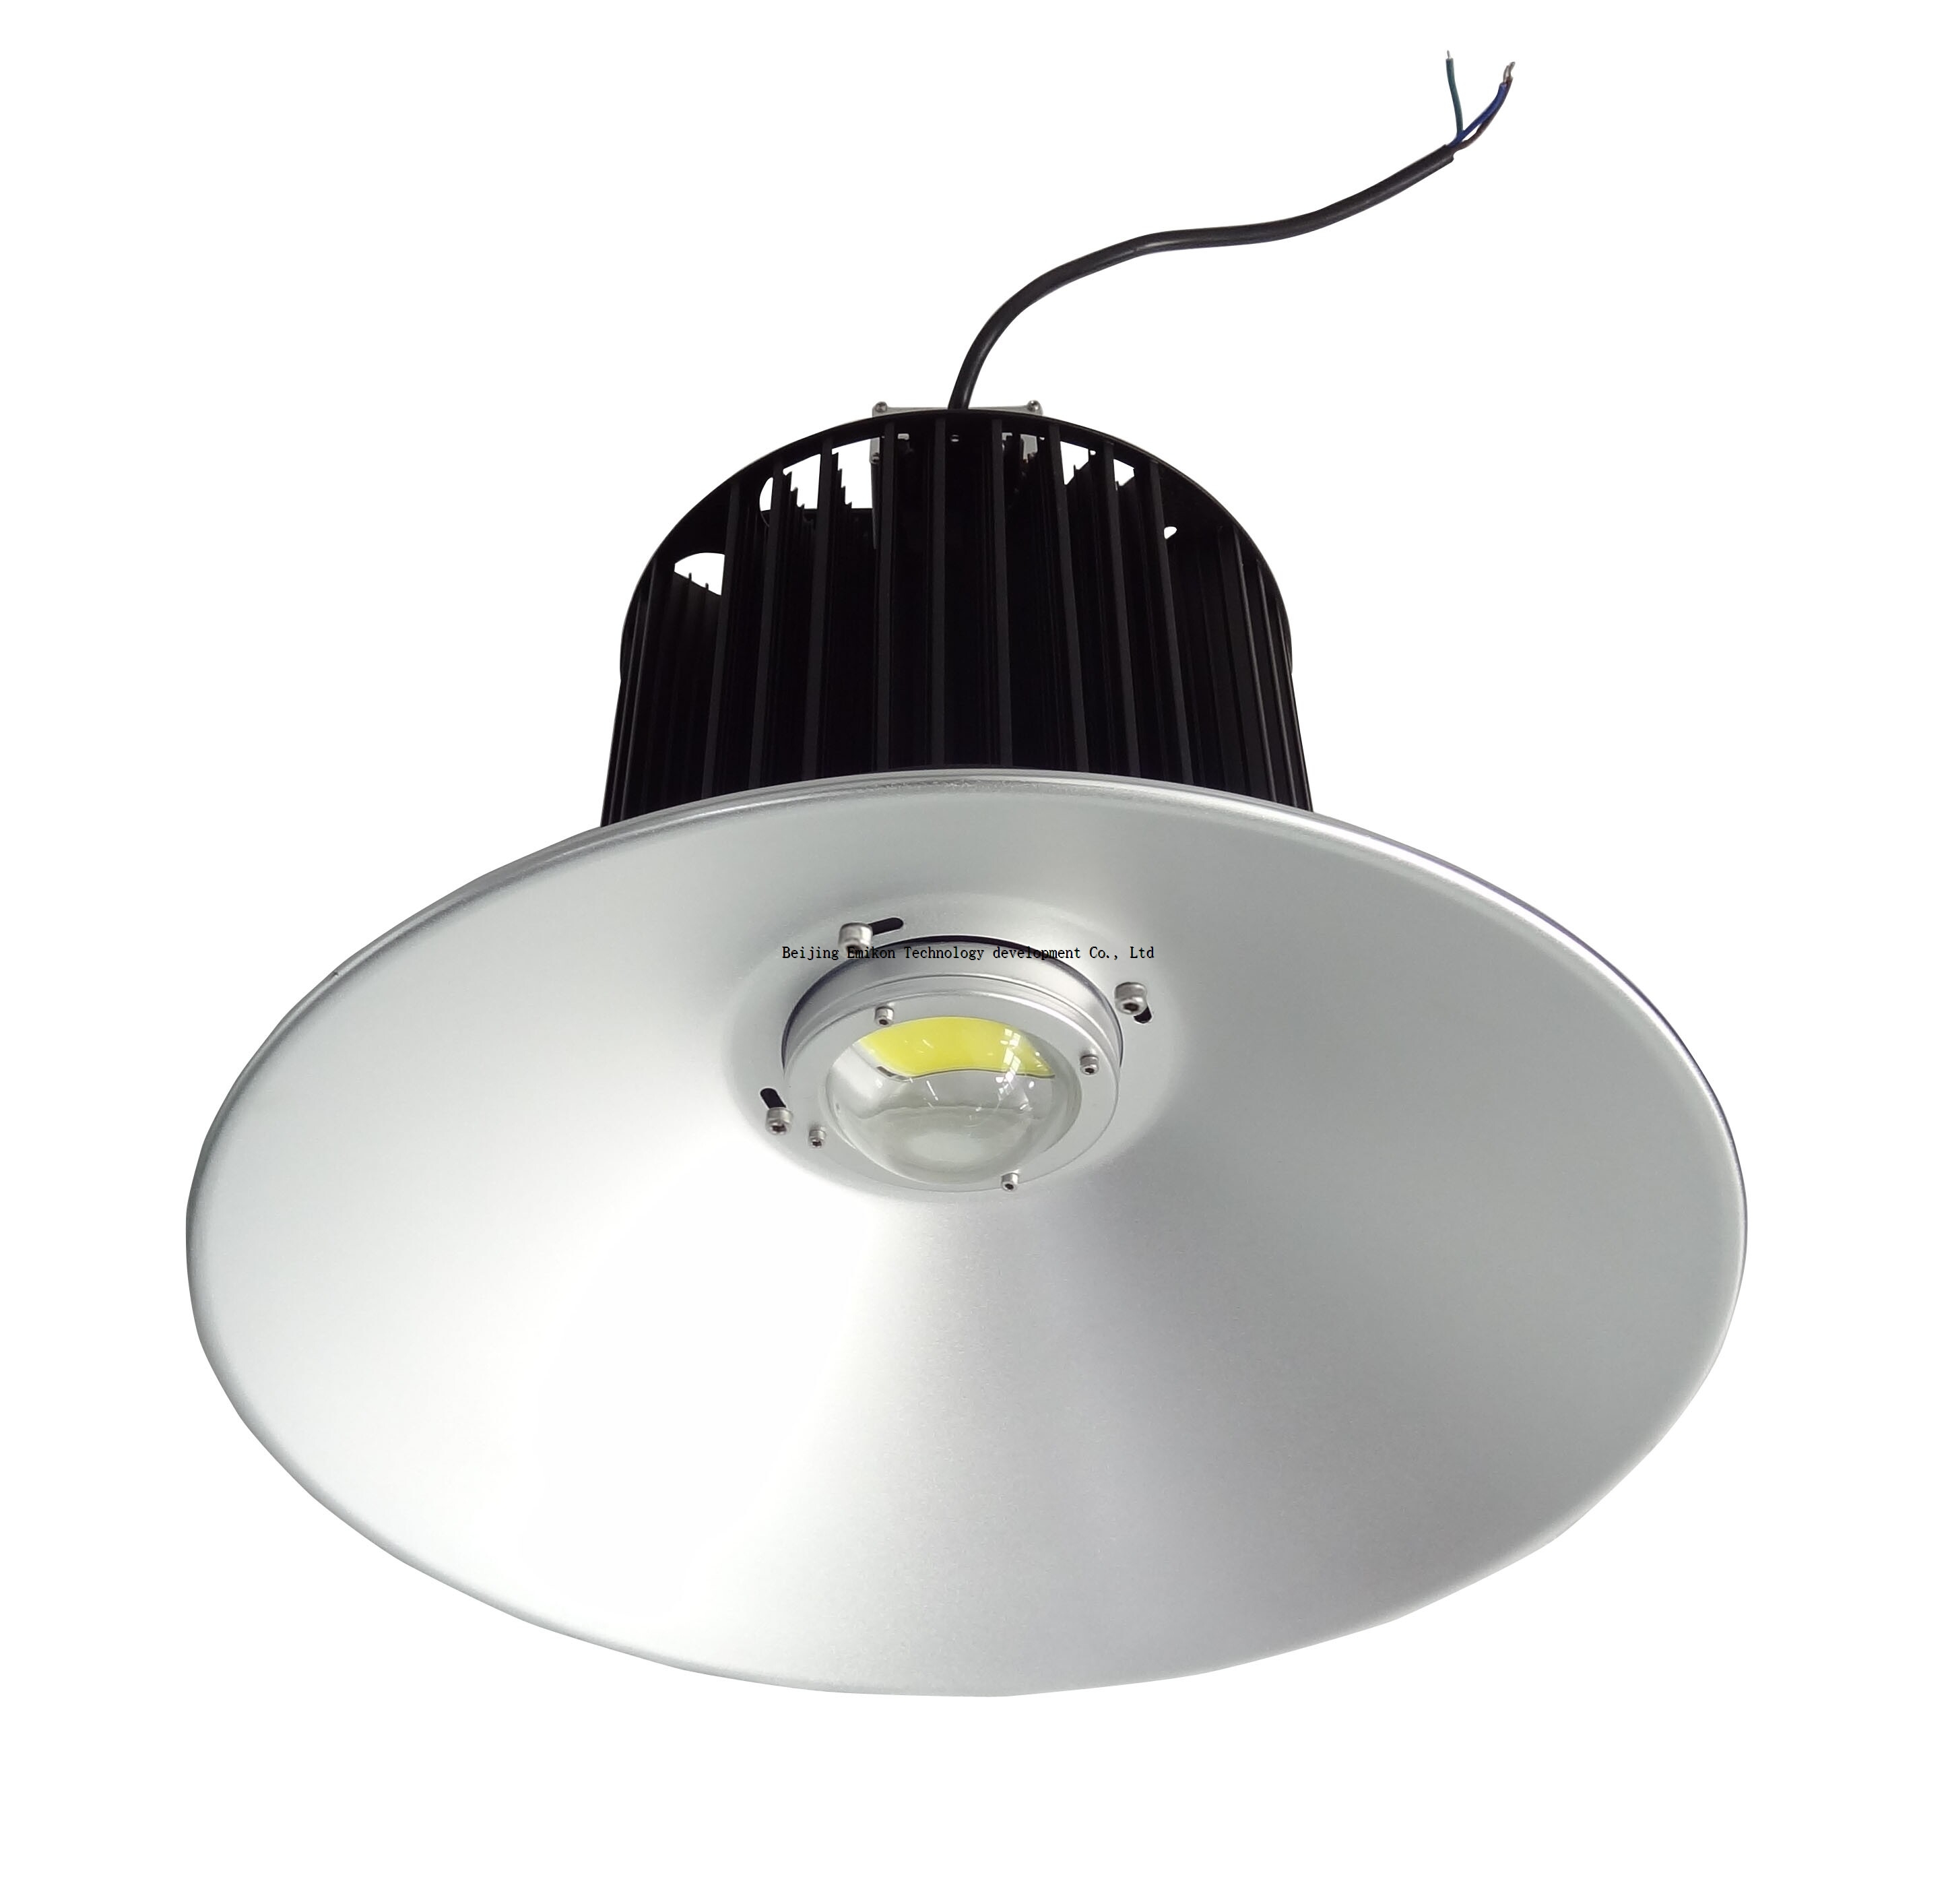 100w LED high bay light with 5 years warranty